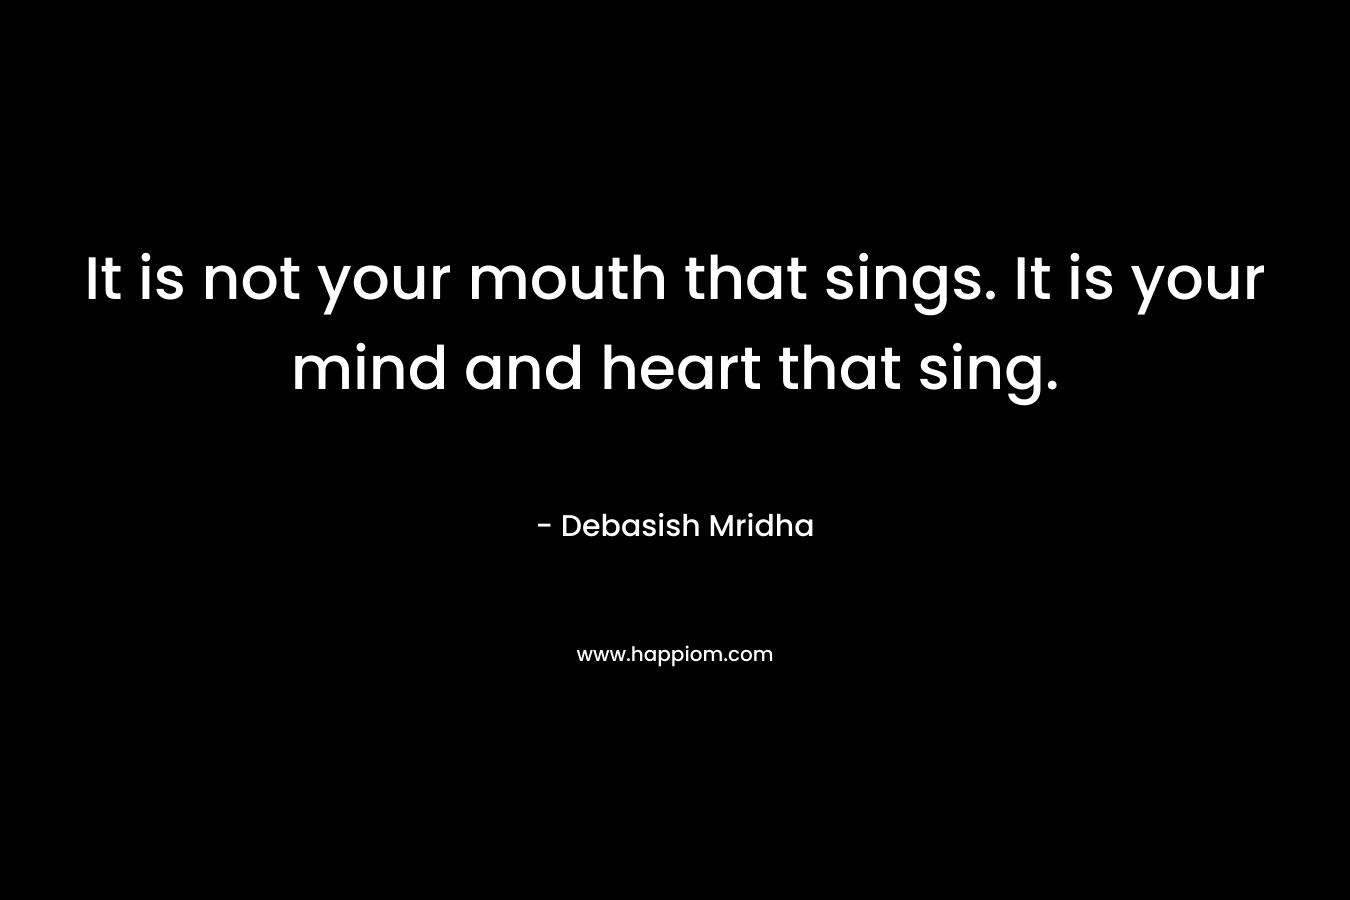 It is not your mouth that sings. It is your mind and heart that sing.